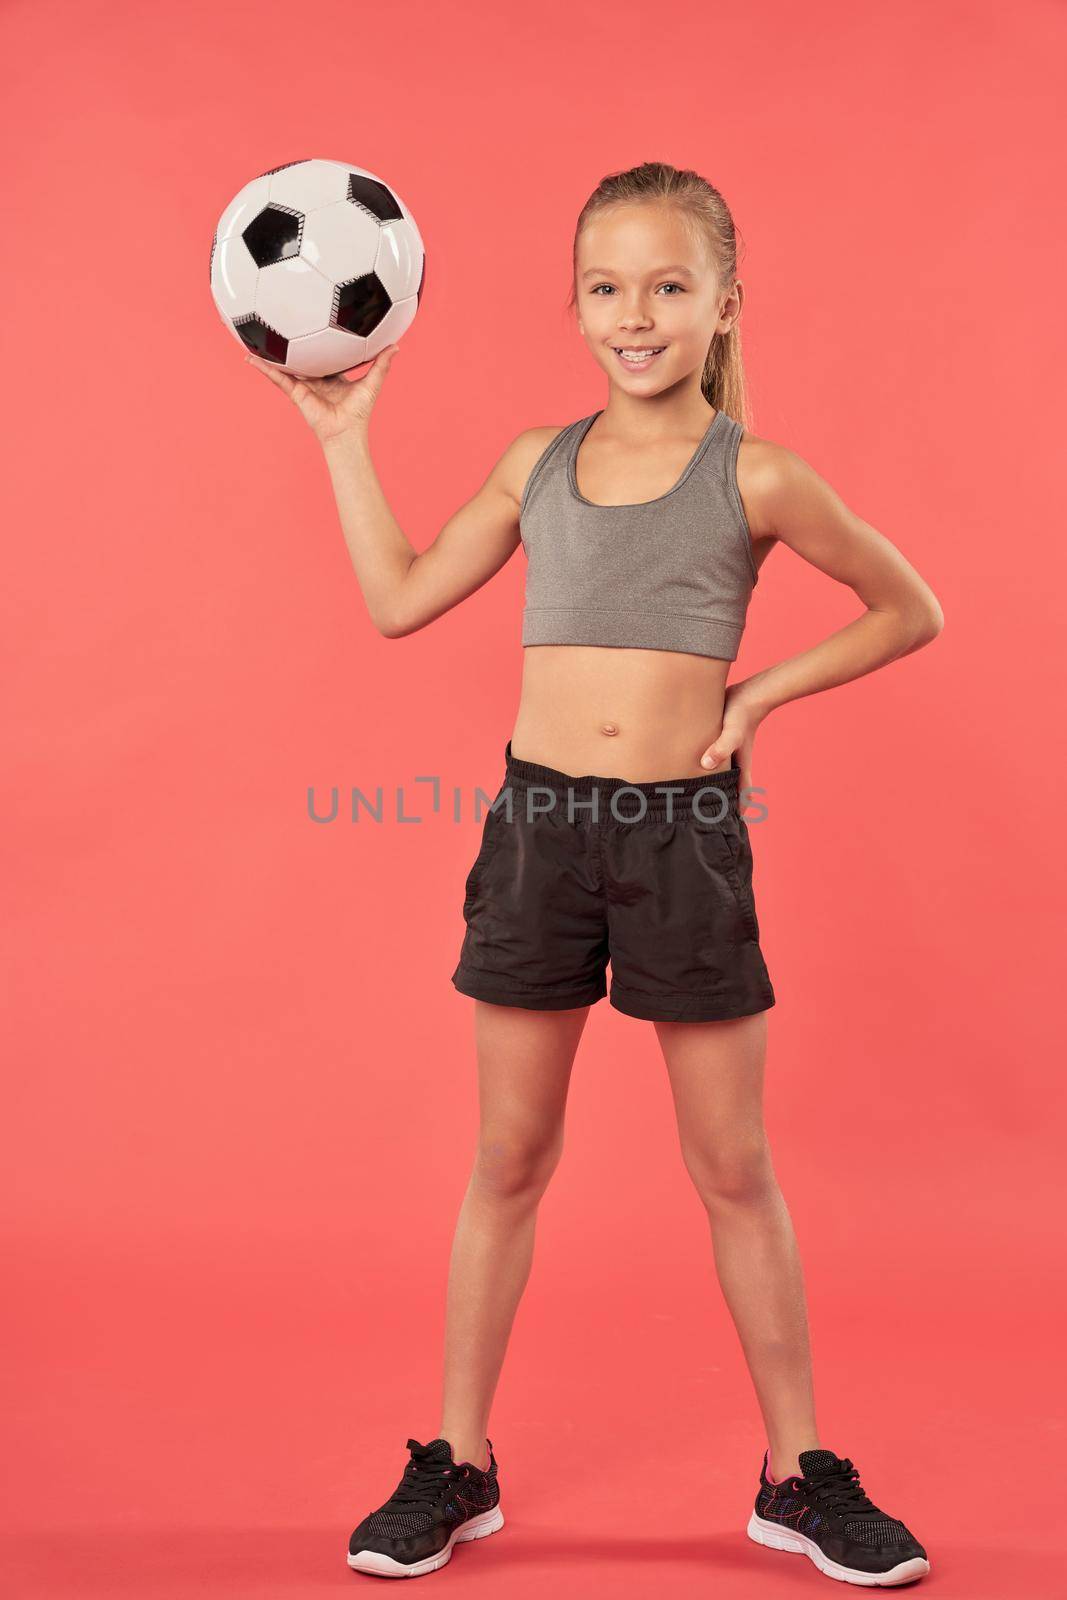 Cute female child with soccer ball standing against red background by friendsstock